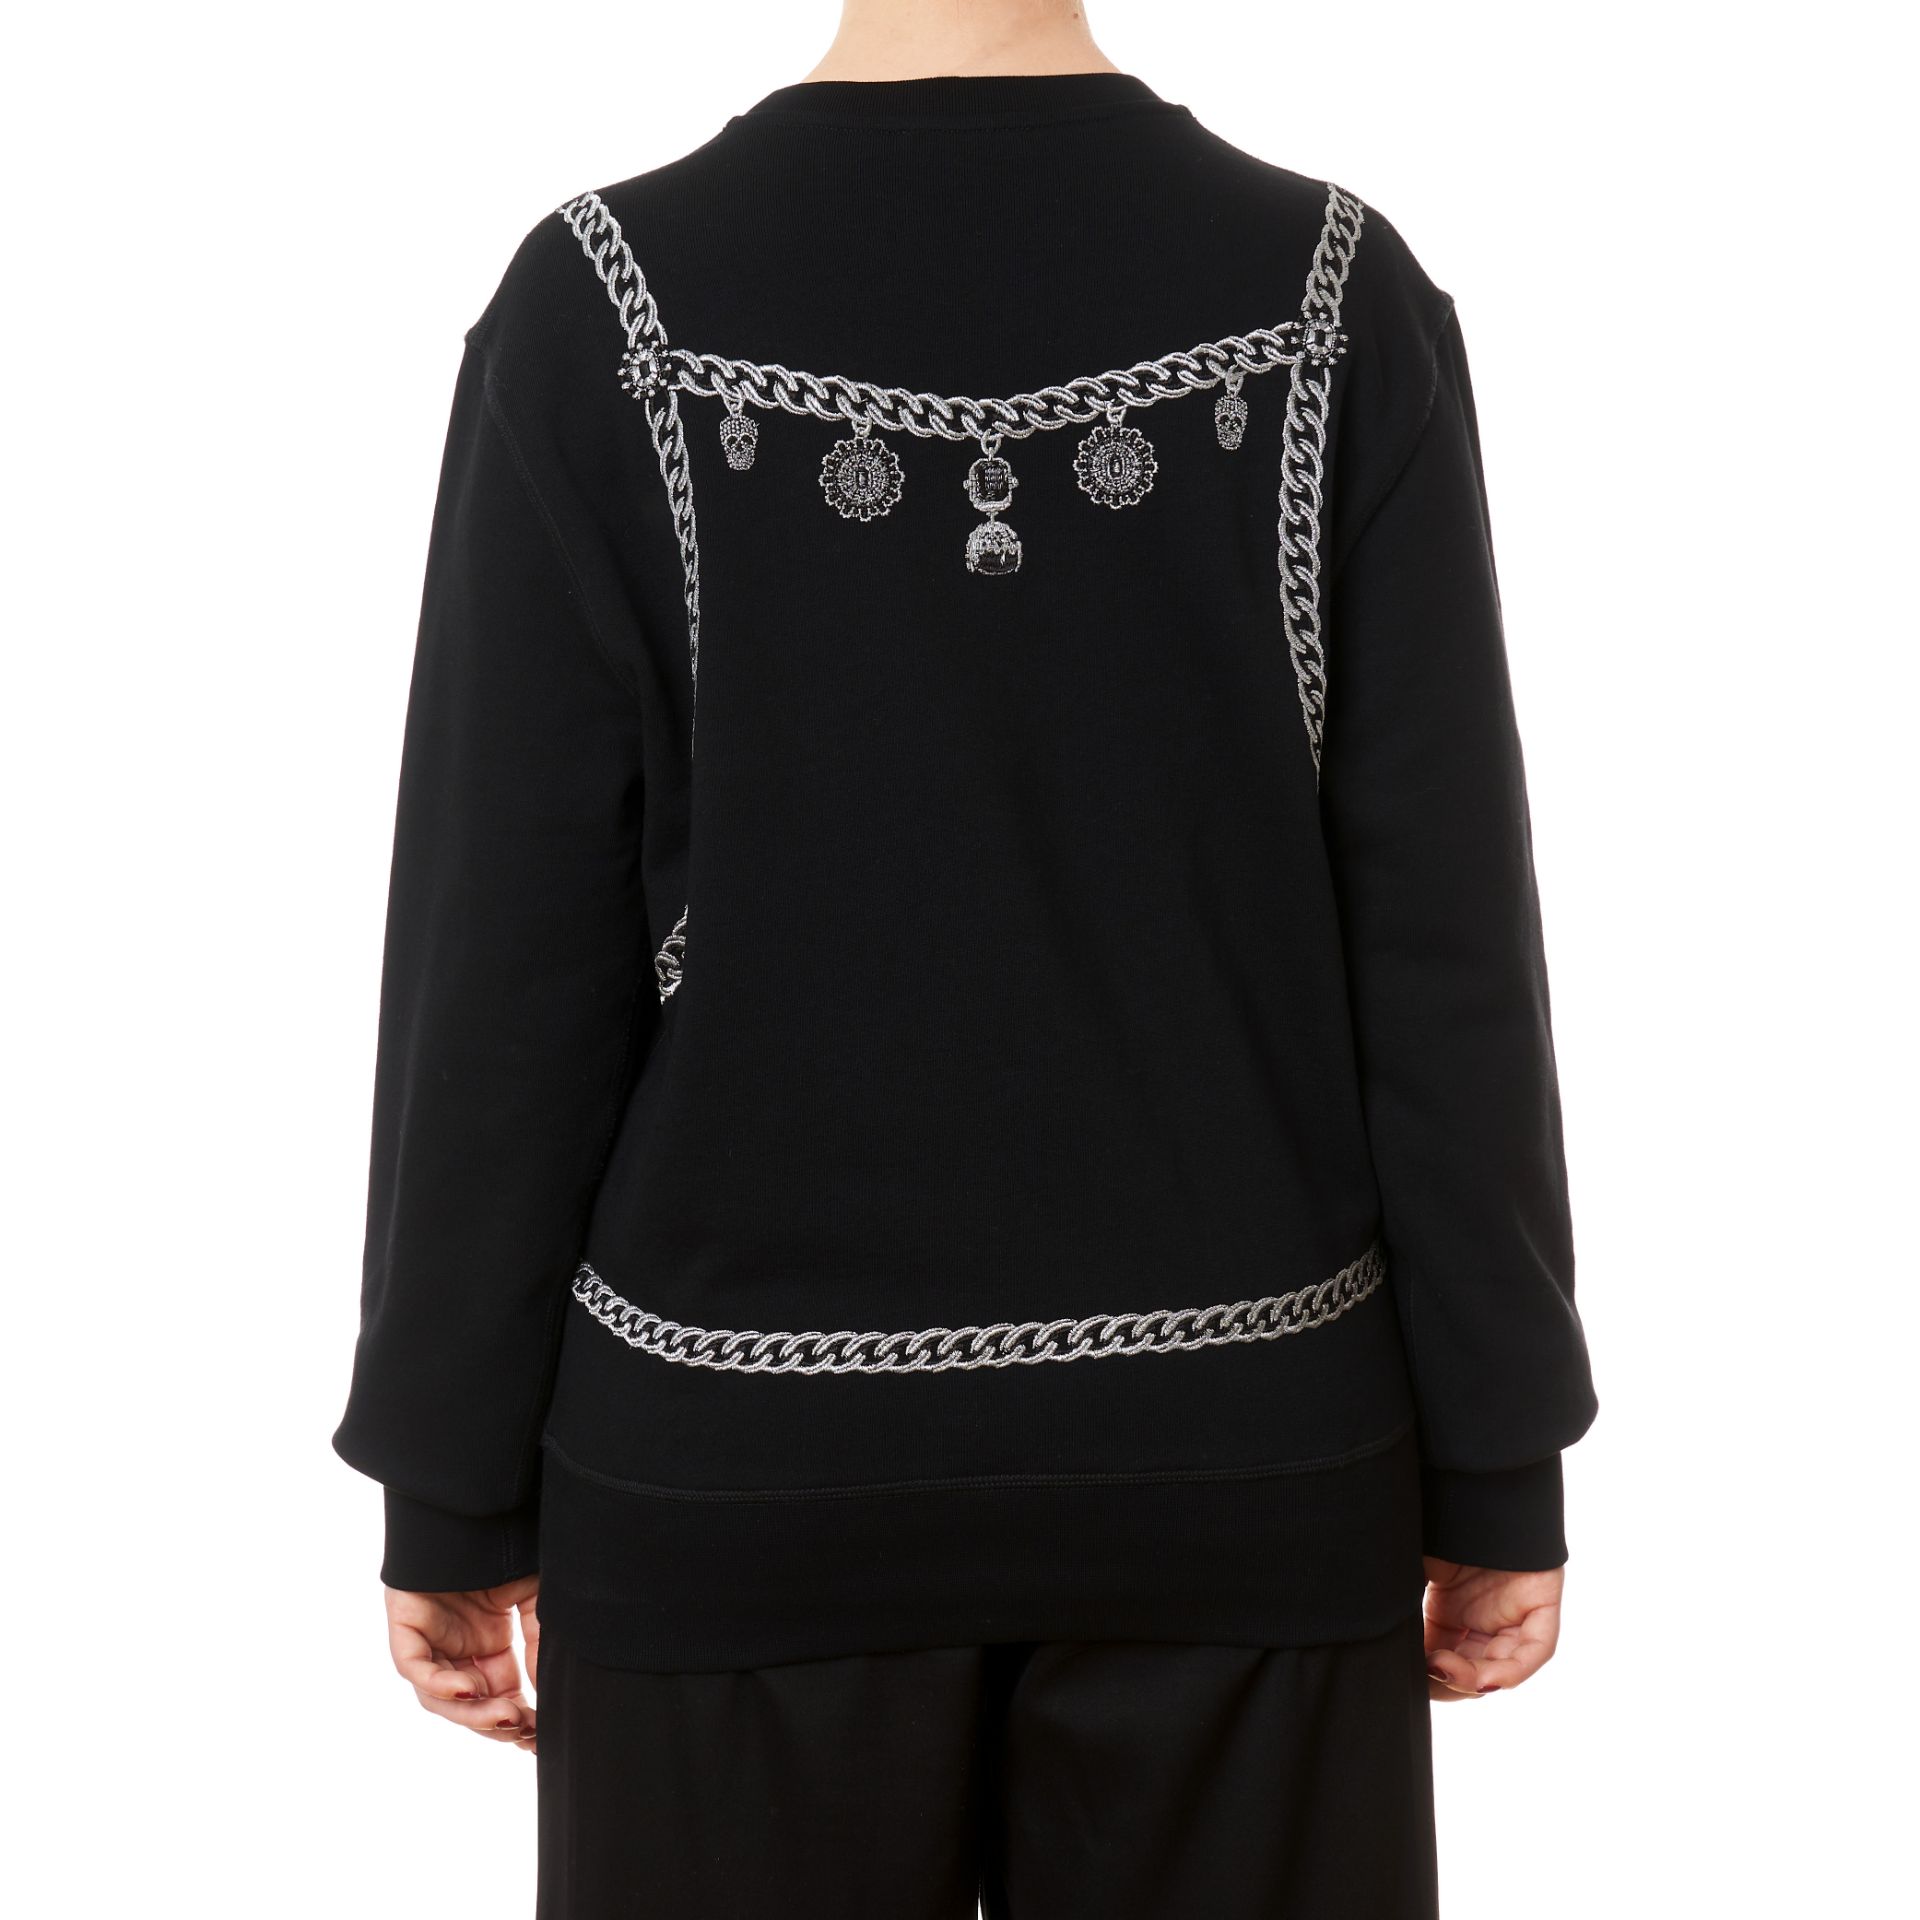 NO RESERVE ALEXANDER MCQUEEN BLACK EMBROIDERED JERSEY - Image 2 of 3